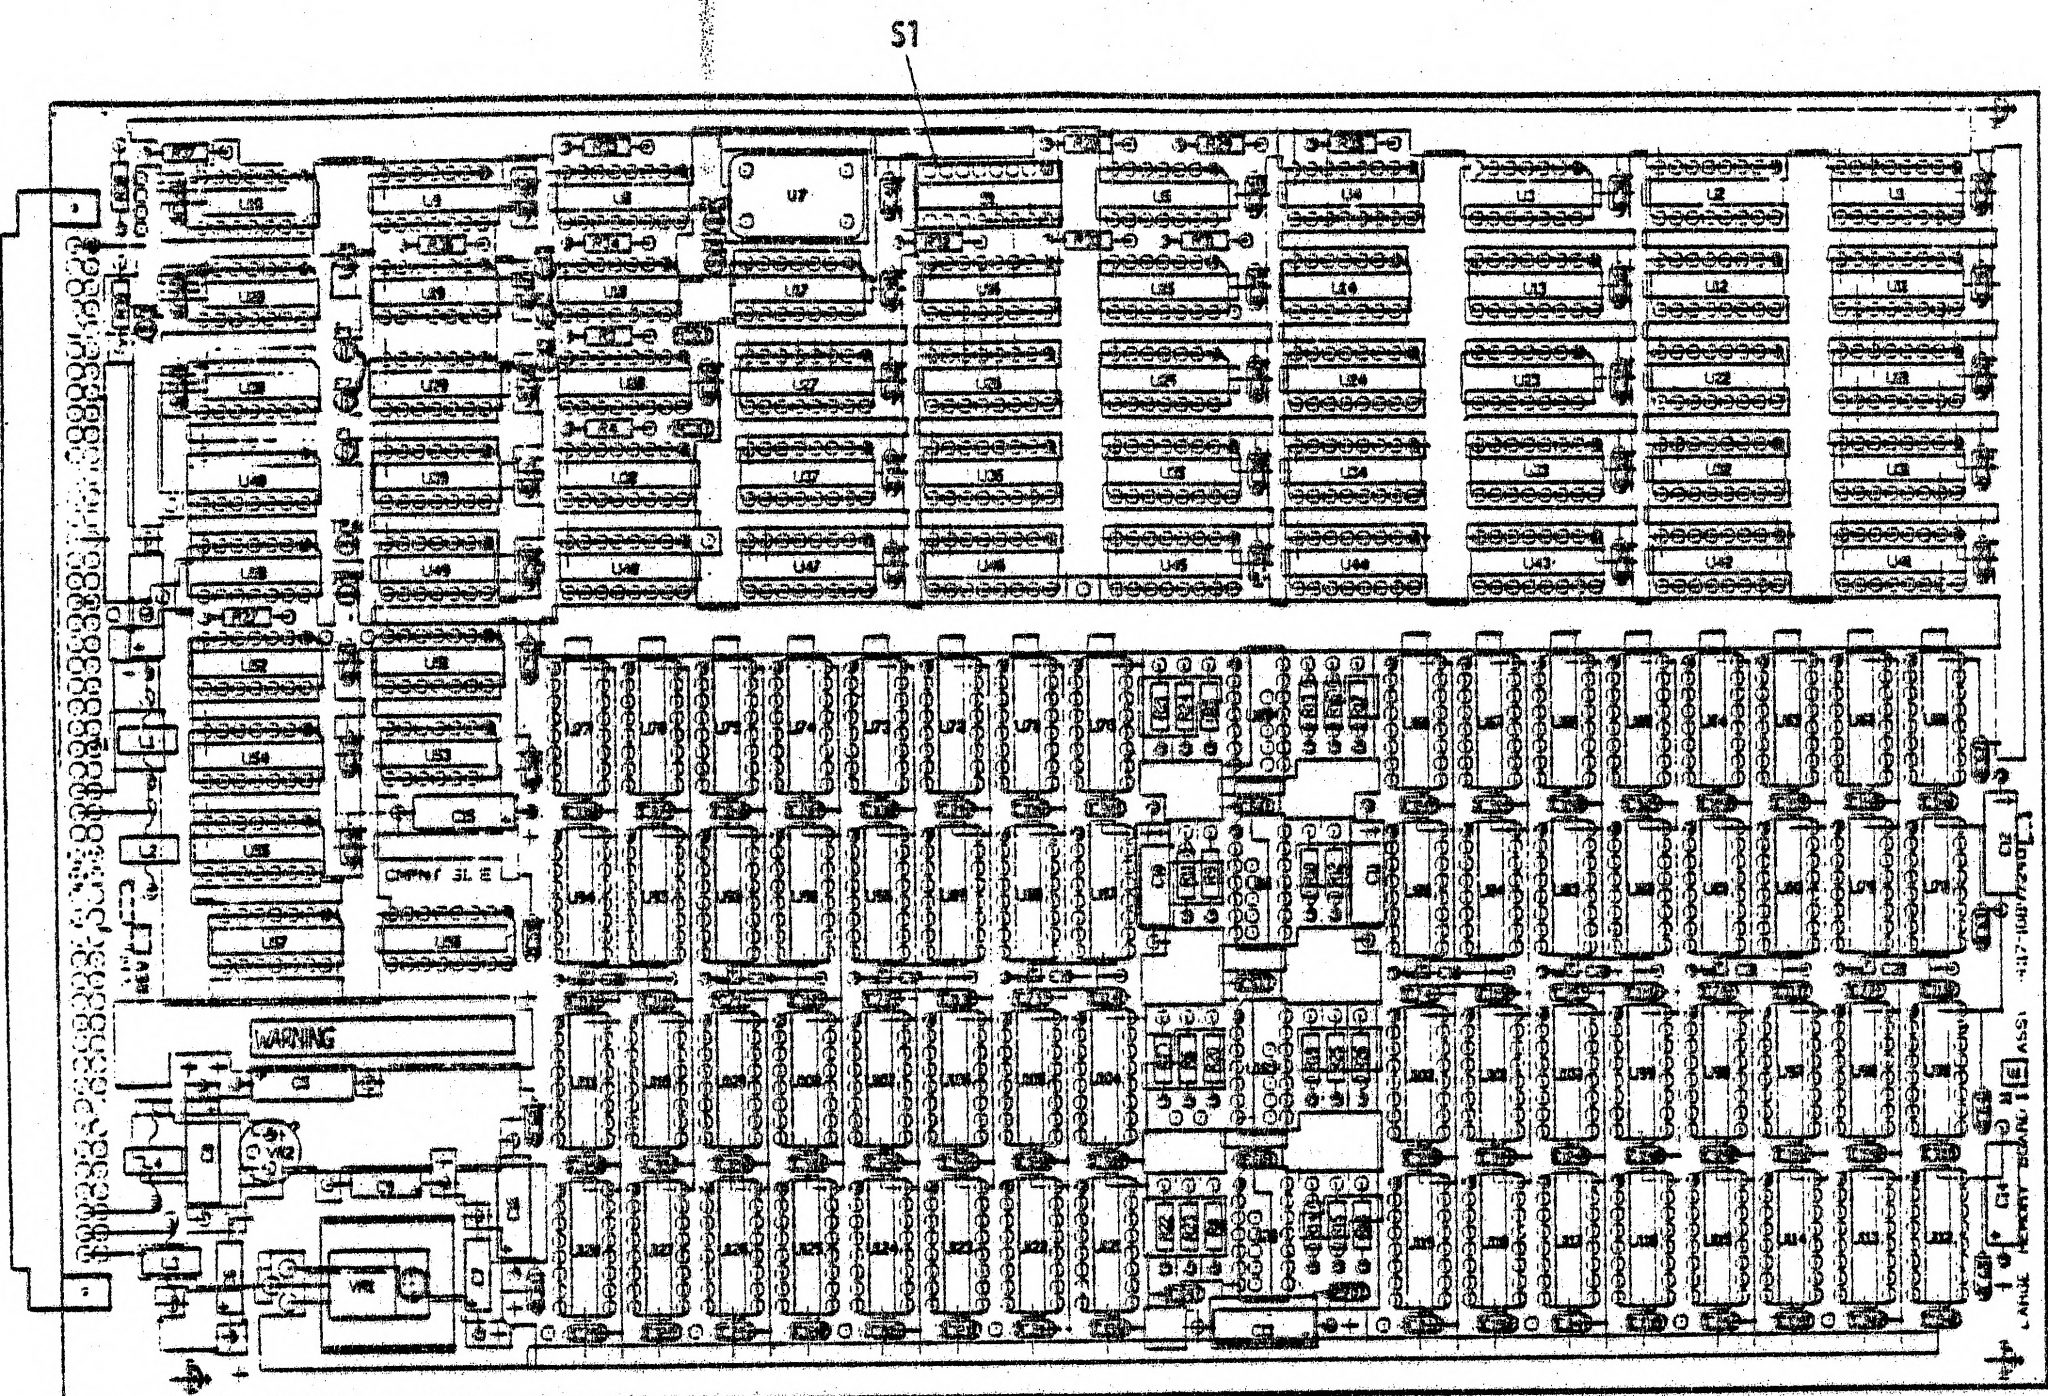 Image from page 123 of "sandersAssociates :: graphic8 :: H-82-0176 Vistagraphic 3000 Graphic 8 Series 8000 Operation and Maintenance Manual Feb1983" (1919)